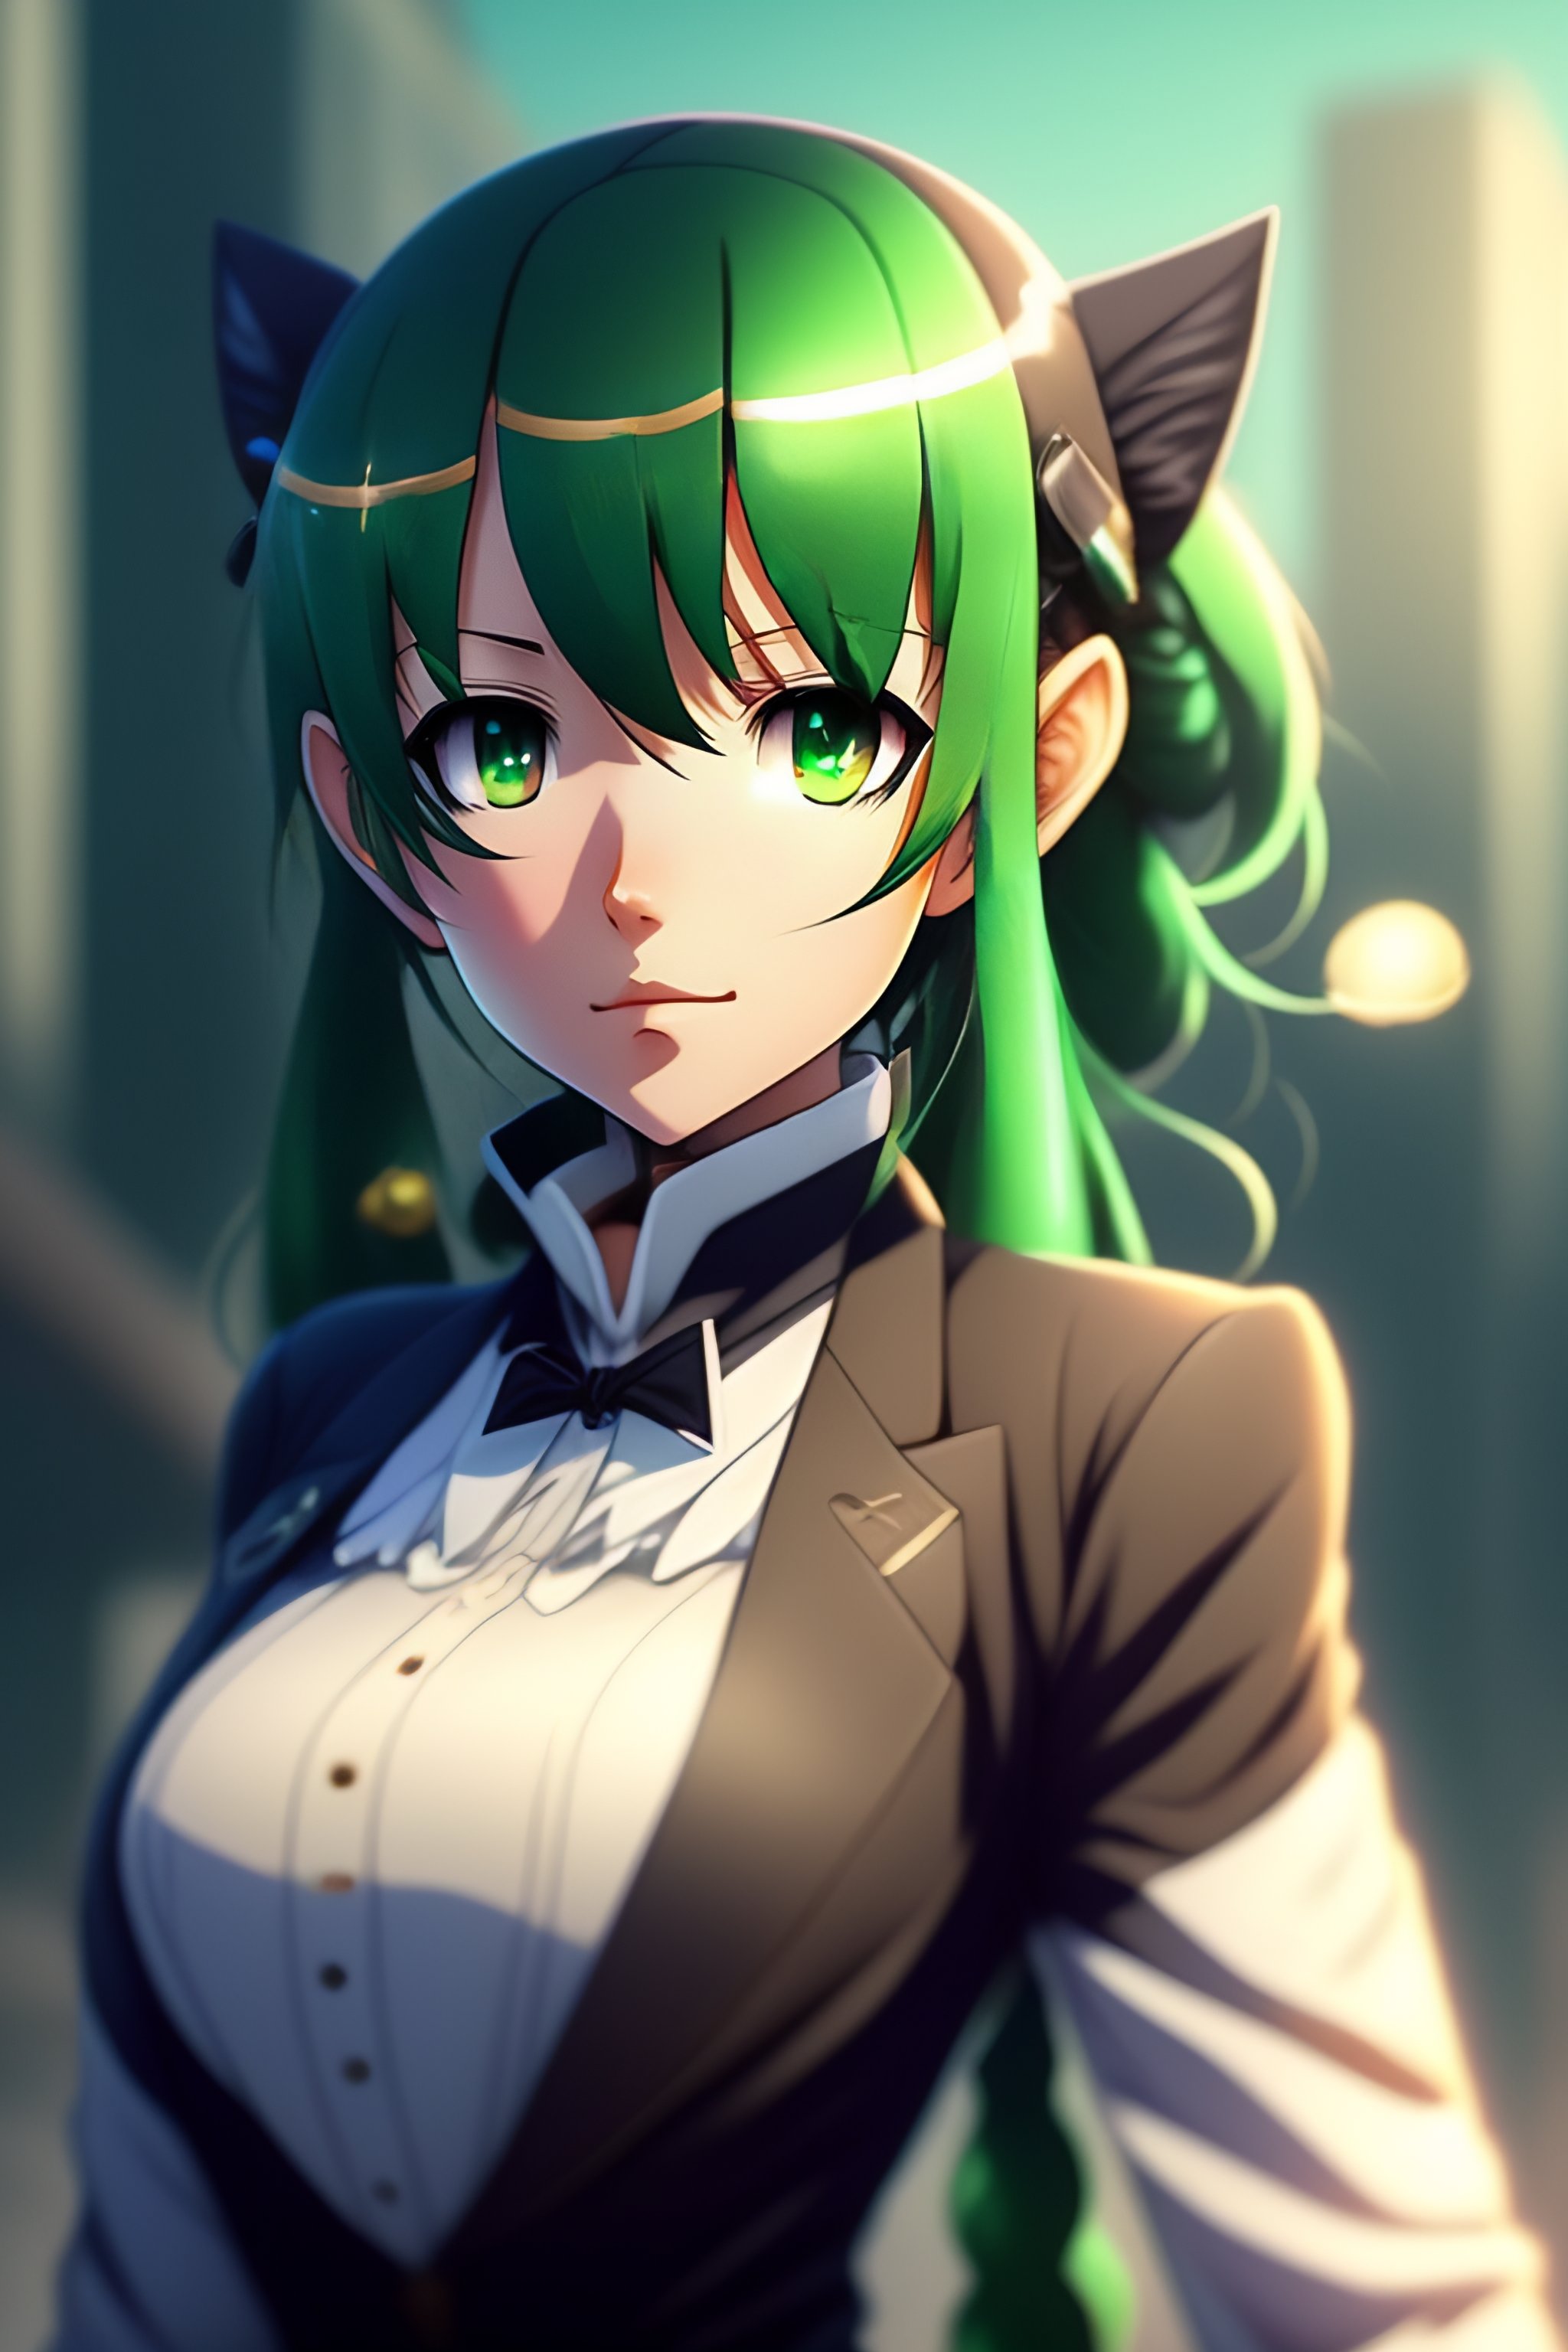 Lexica - Anime,green hair pigtails,small smile,black suit,short,brown eyes